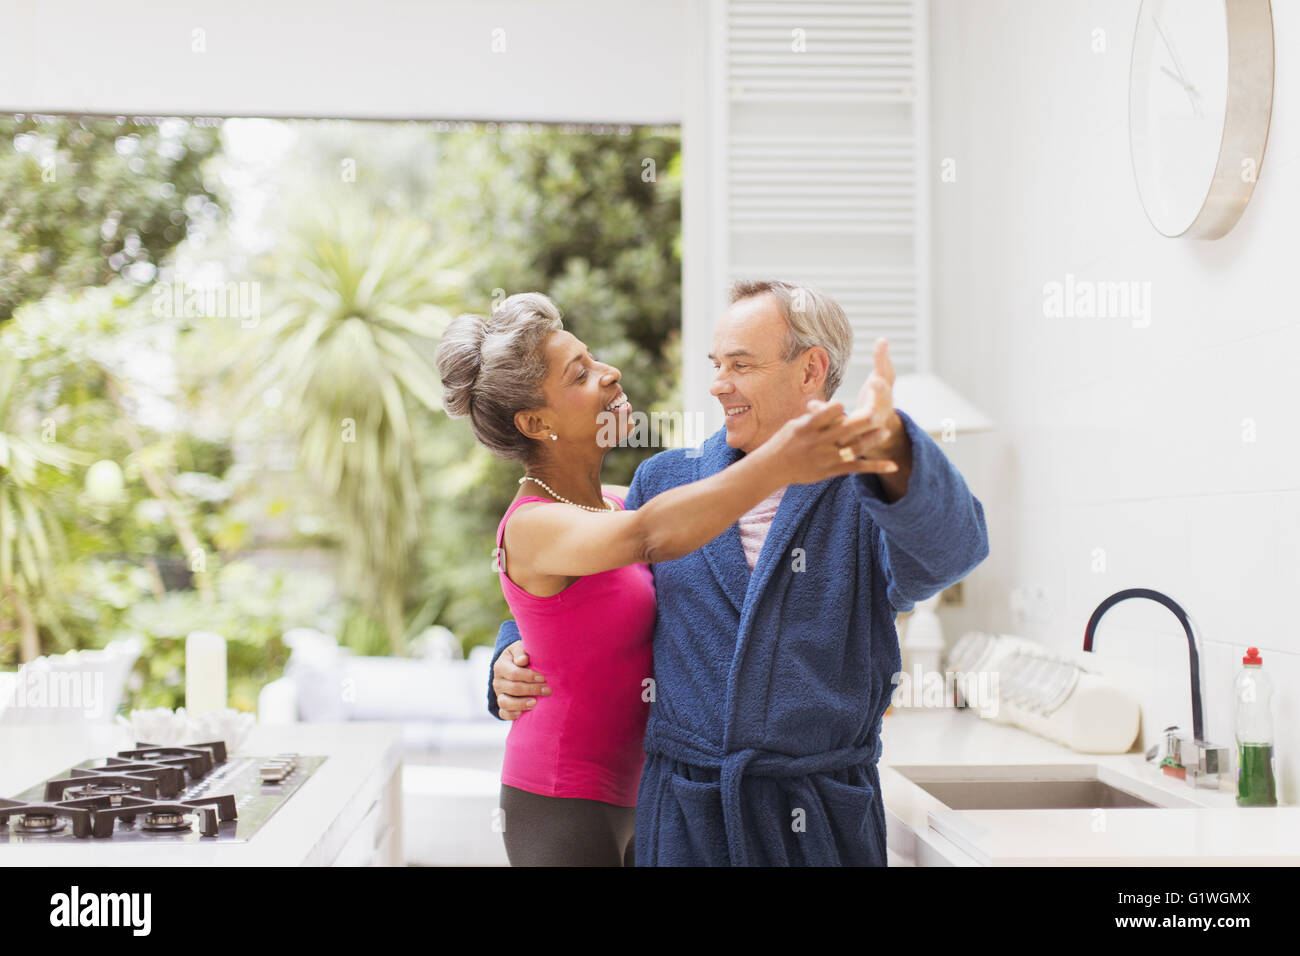 Playful mature couple dancing in kitchen Stock Photo